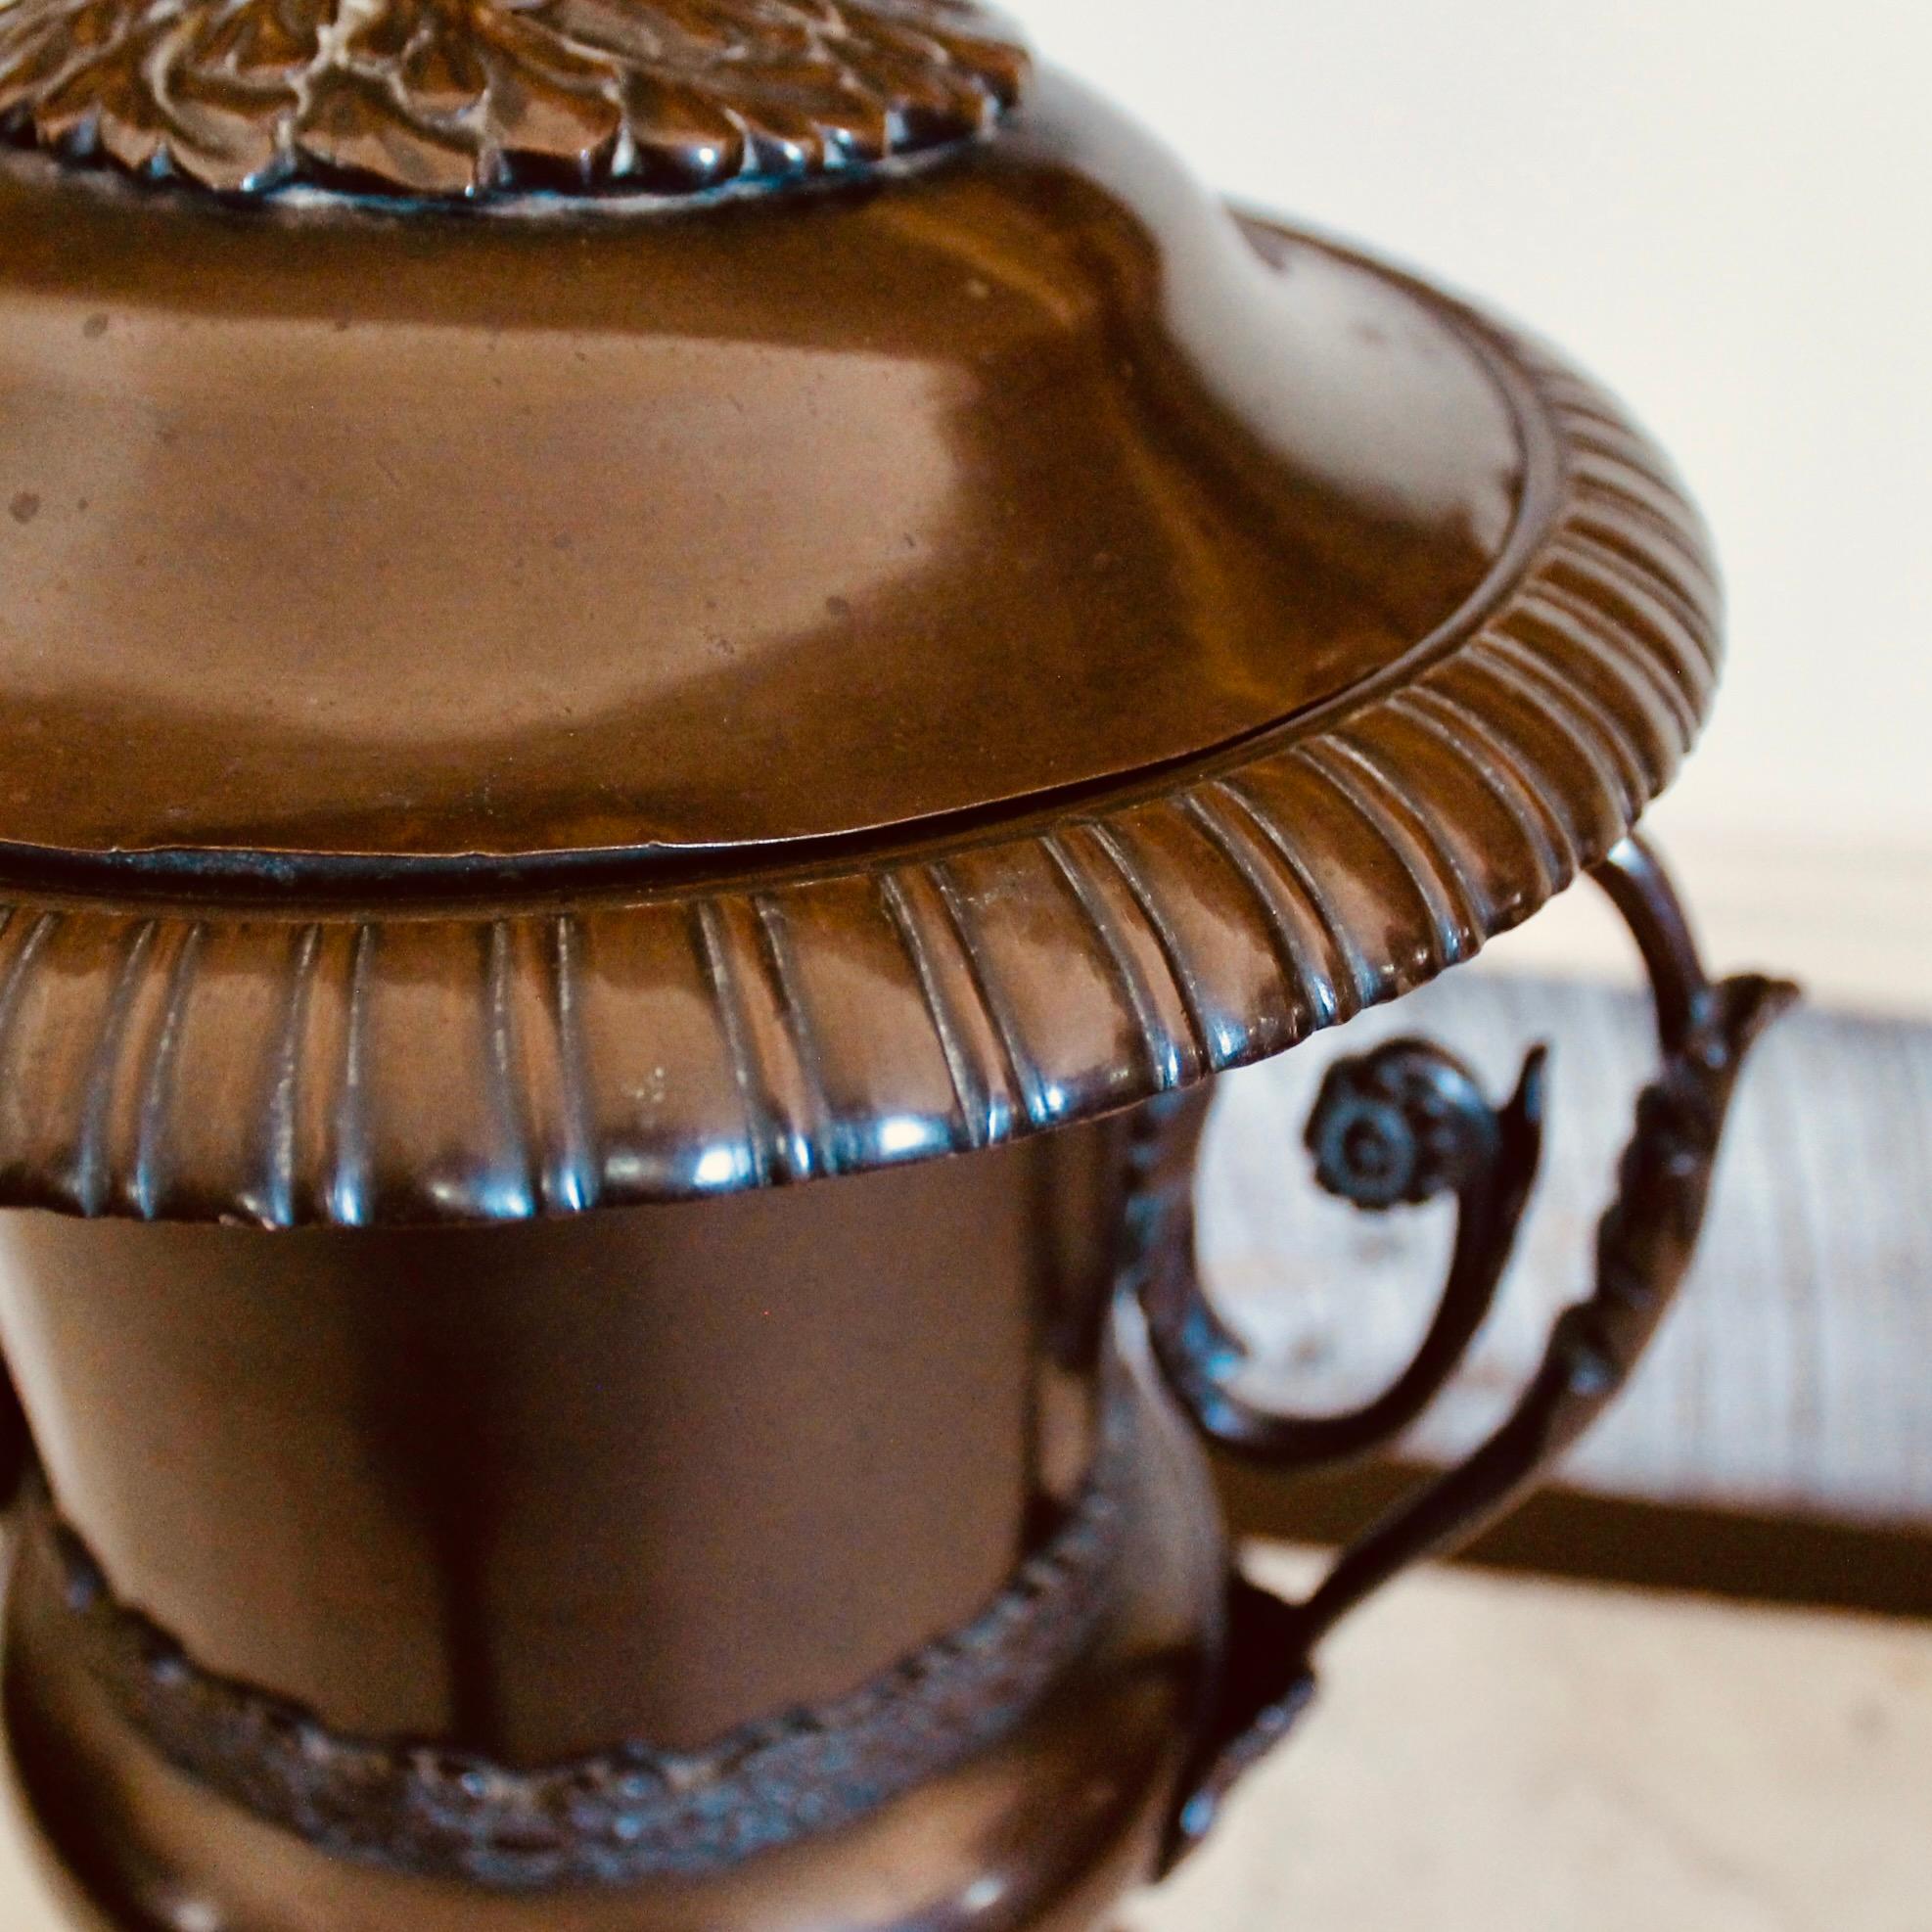 English Antique Regency Period Copper Hot Water Urn (Samovar) In Good Condition For Sale In Free Union, VA